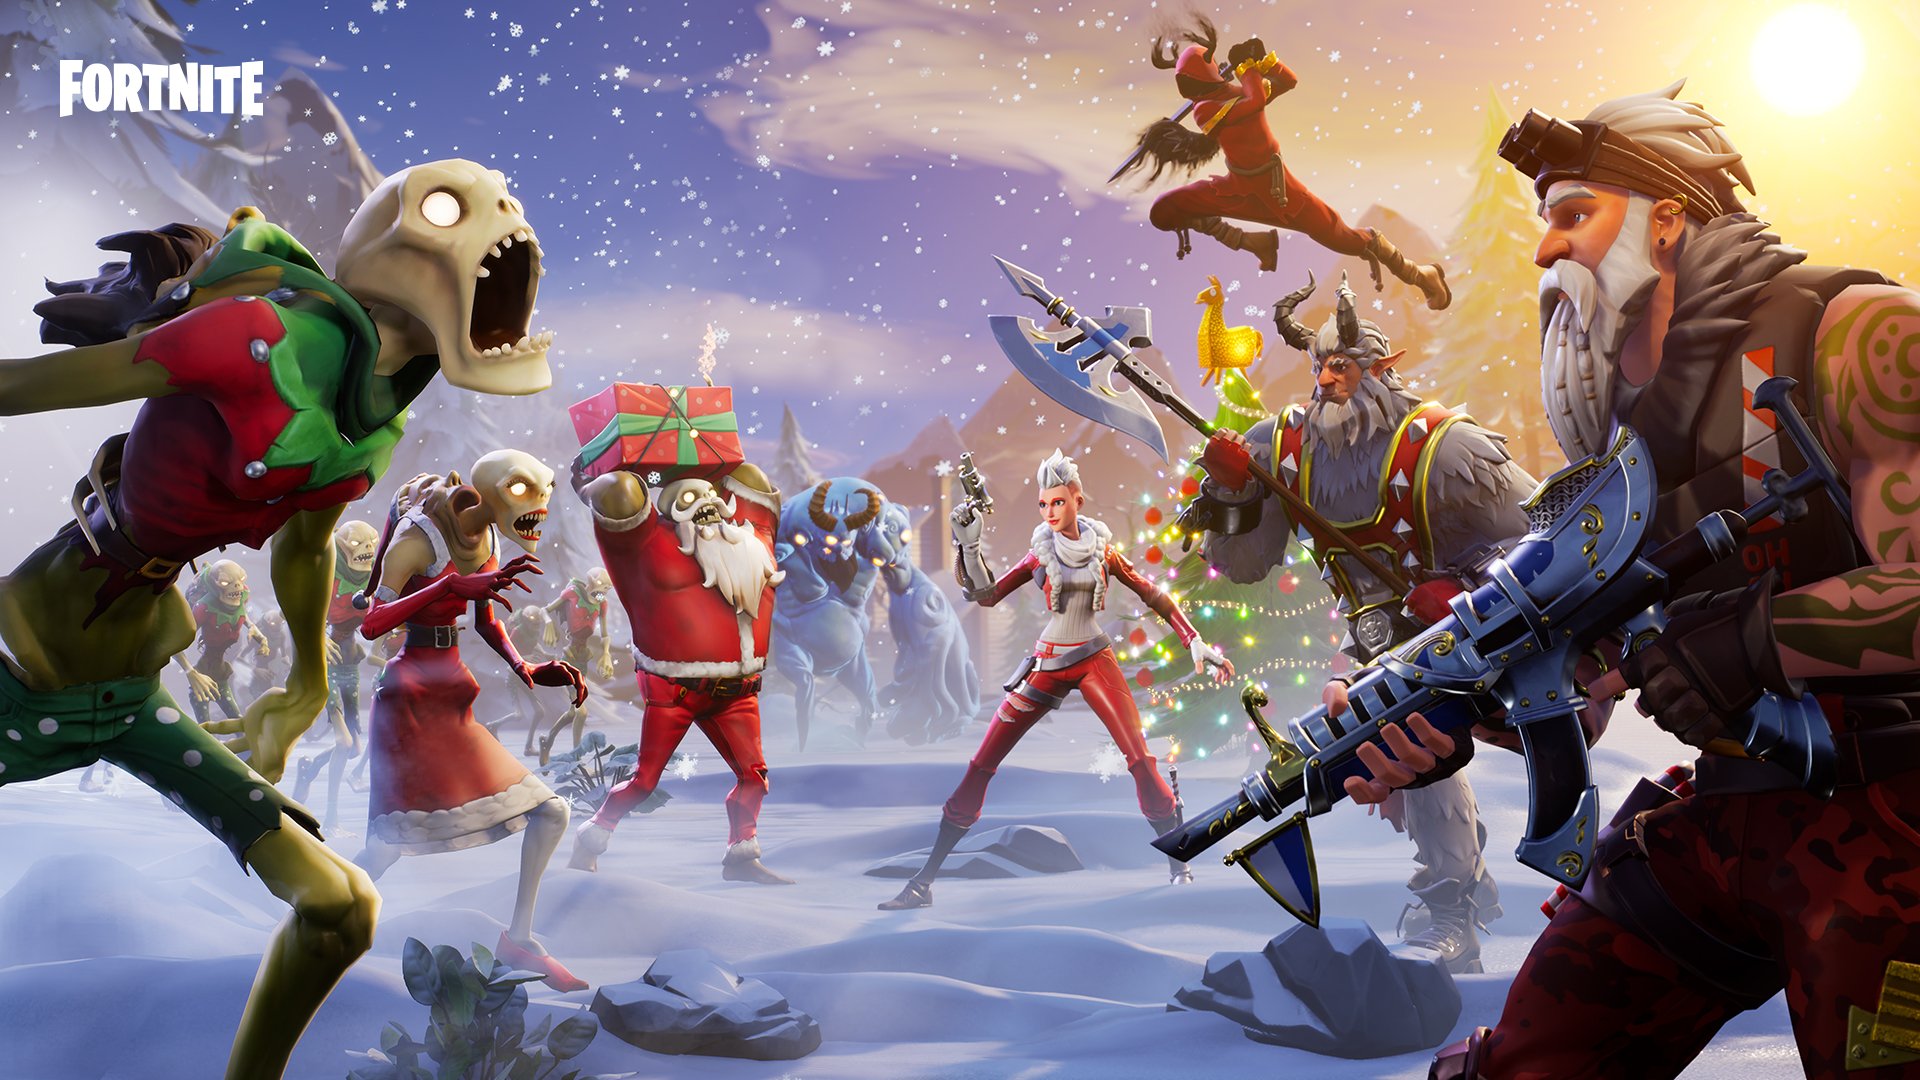 Epic Games Celebrates The Holidays With '14 Days of Fortnite